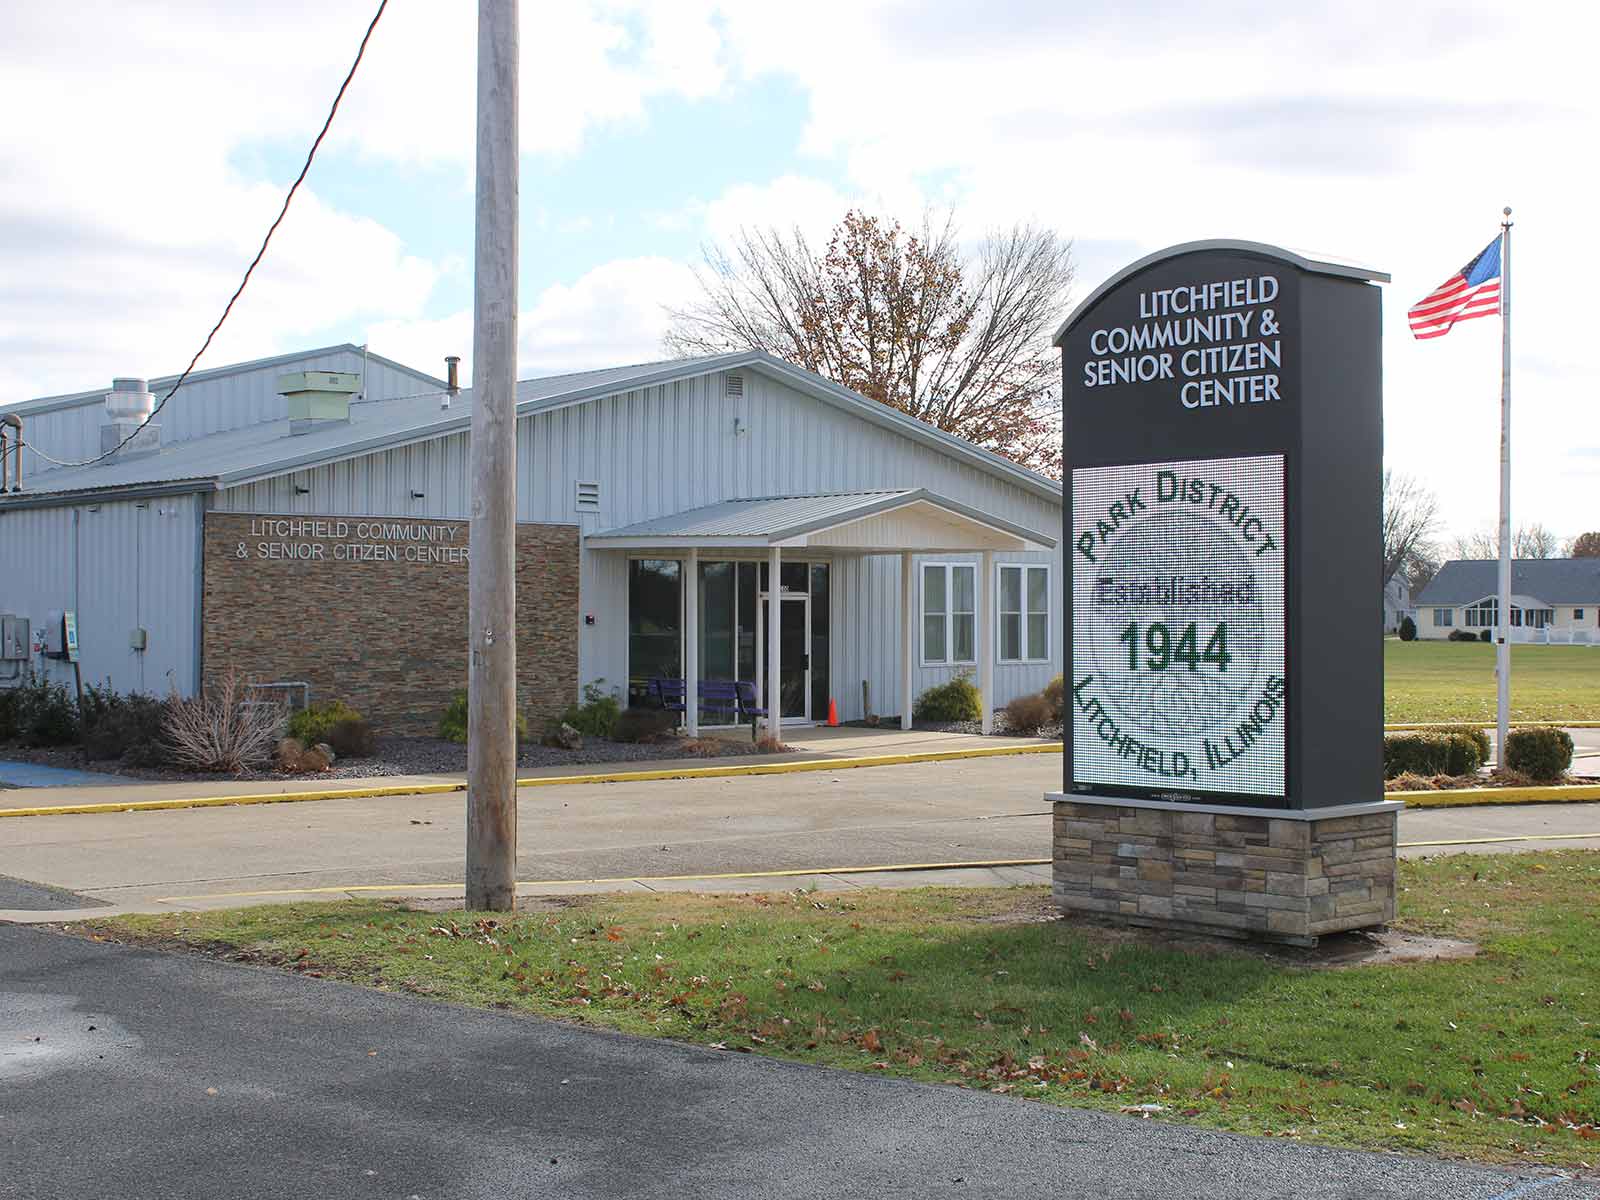 exterior view of the Litchfield Community and Senior Citizen Center showing the building's sign